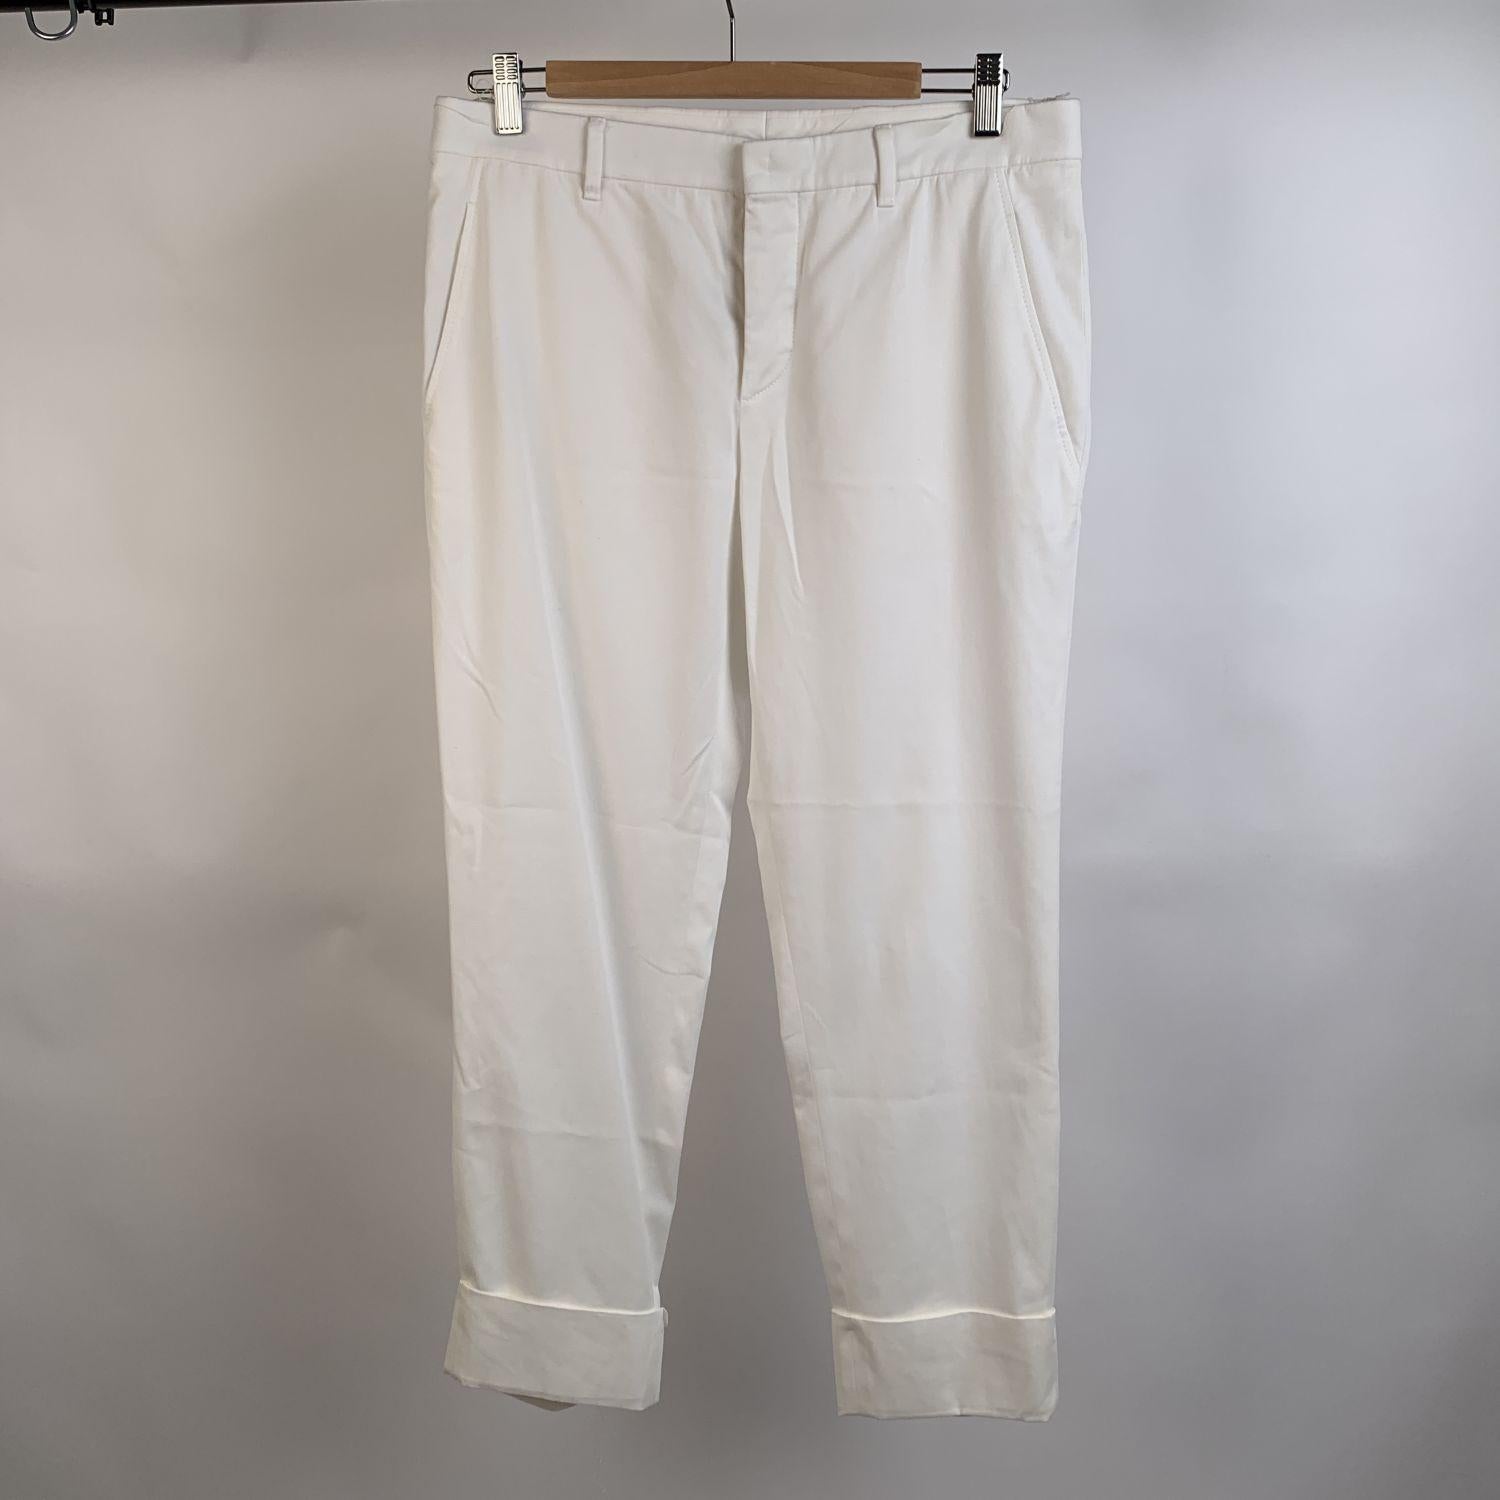 Miu Miu white stretch cotton trousers. Front button and zip closure. Belt loops. Rolled hem. Hips pockets. Composition: 96% Cotton, 4% Elastane. Size 40 IT (it should correspond to a SMALL size)



Details

MATERIAL: Cotton

COLOR: White

MODEL: